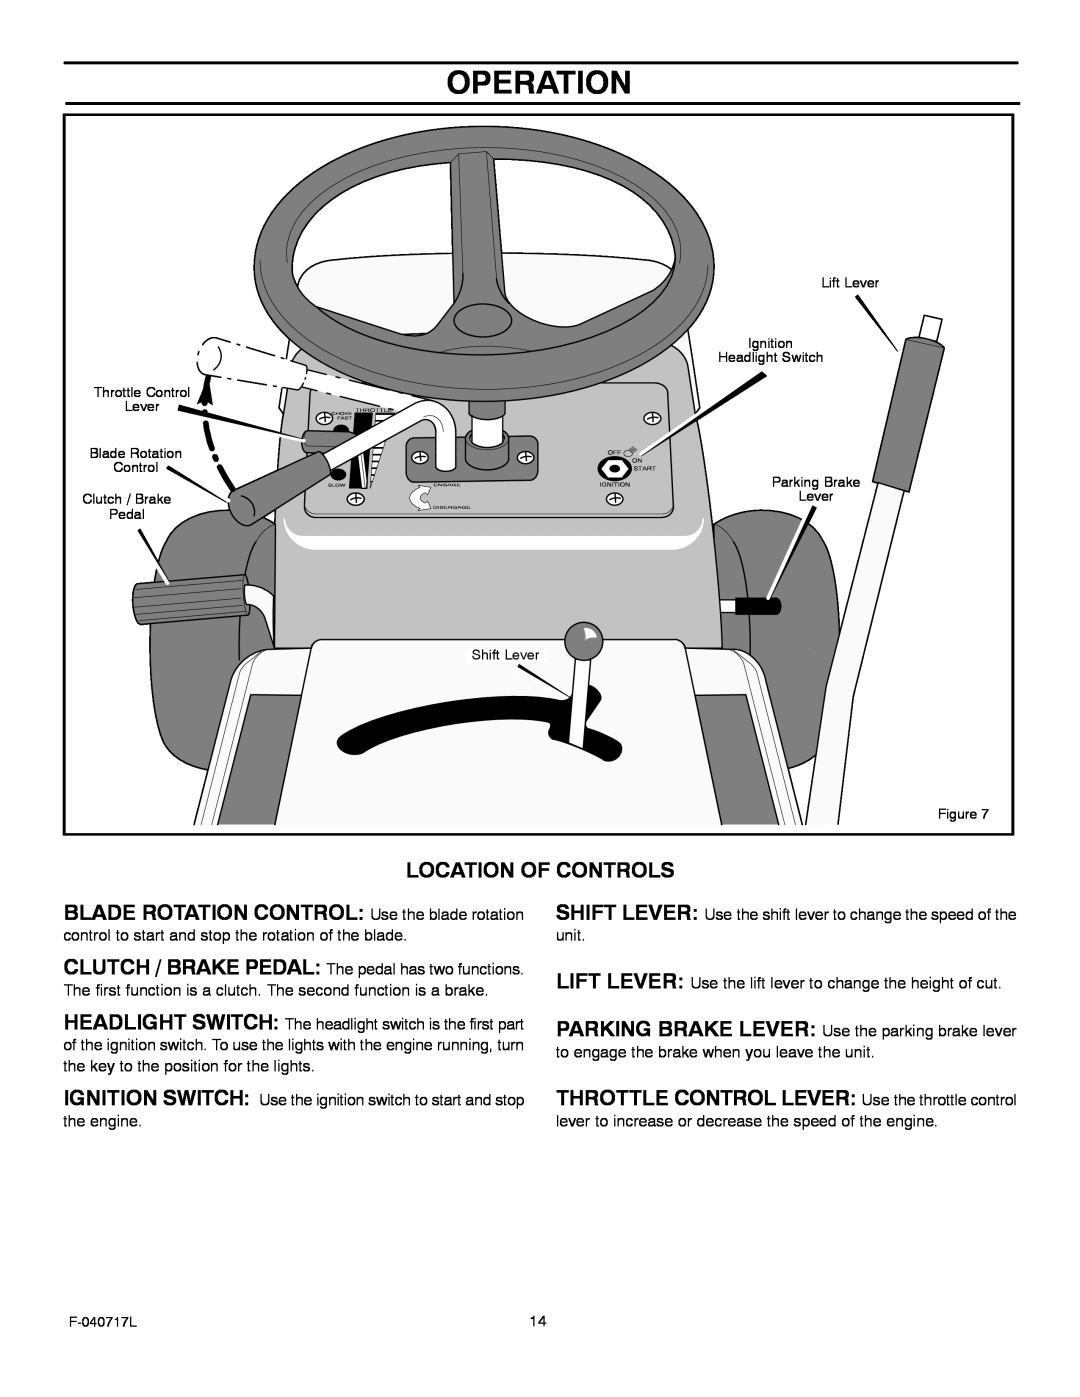 Murray 387002x92A manual Operation, Location Of Controls, BLADE ROTATION CONTROL Use the blade rotation, Lift Lever 